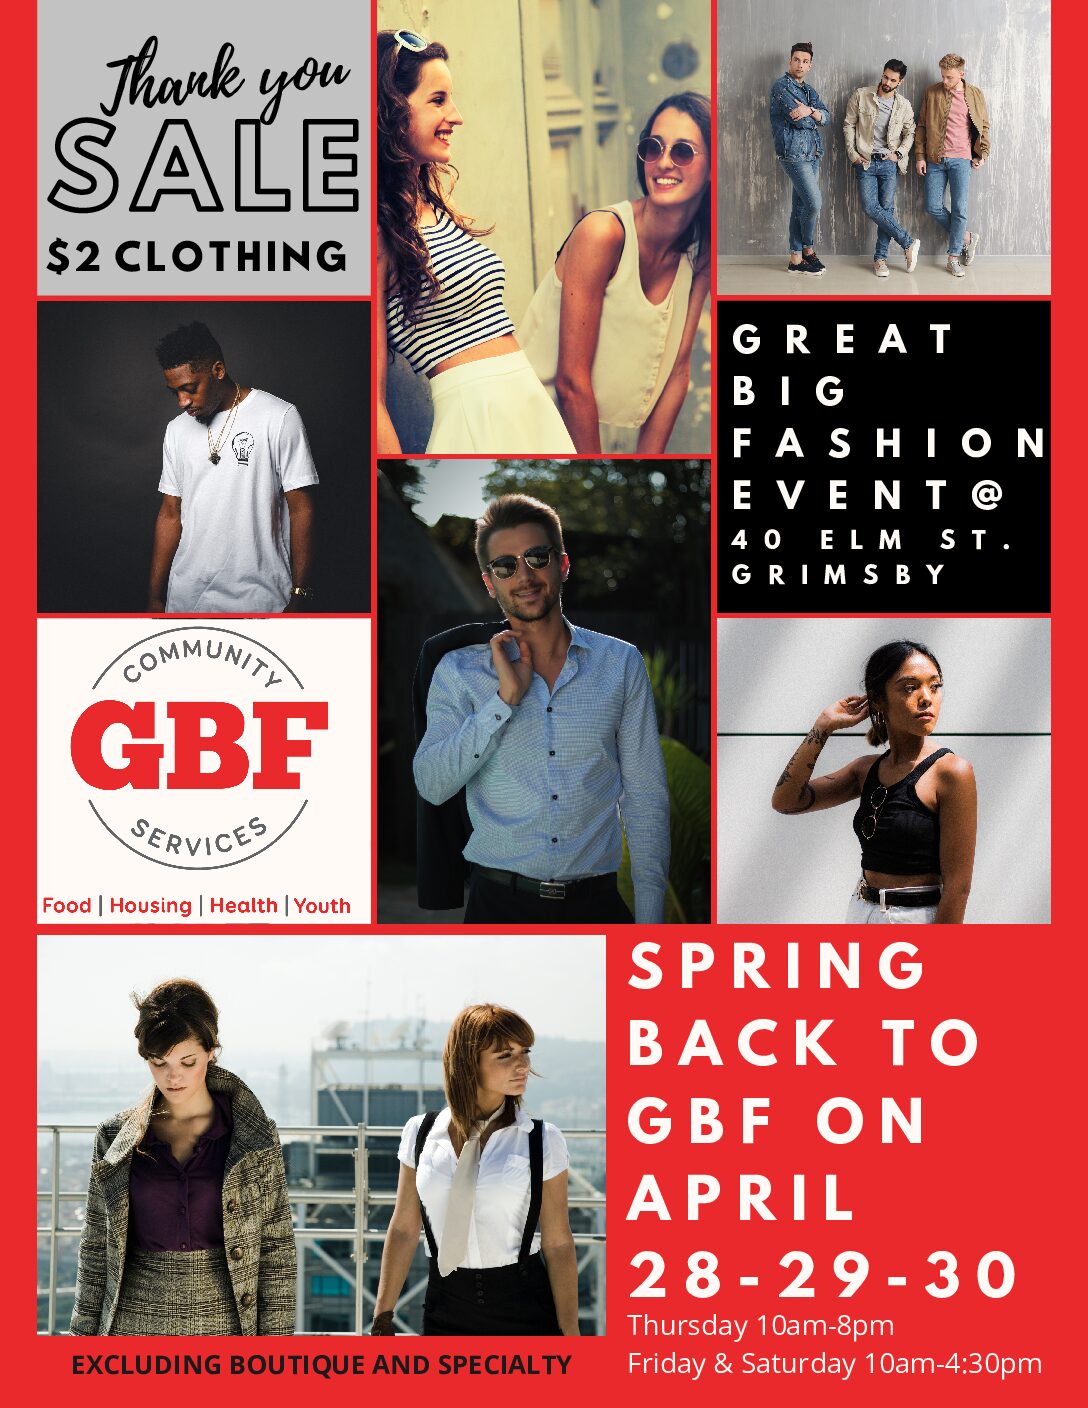 SPRING BACK TO GBF! $2 Clothing Sale!